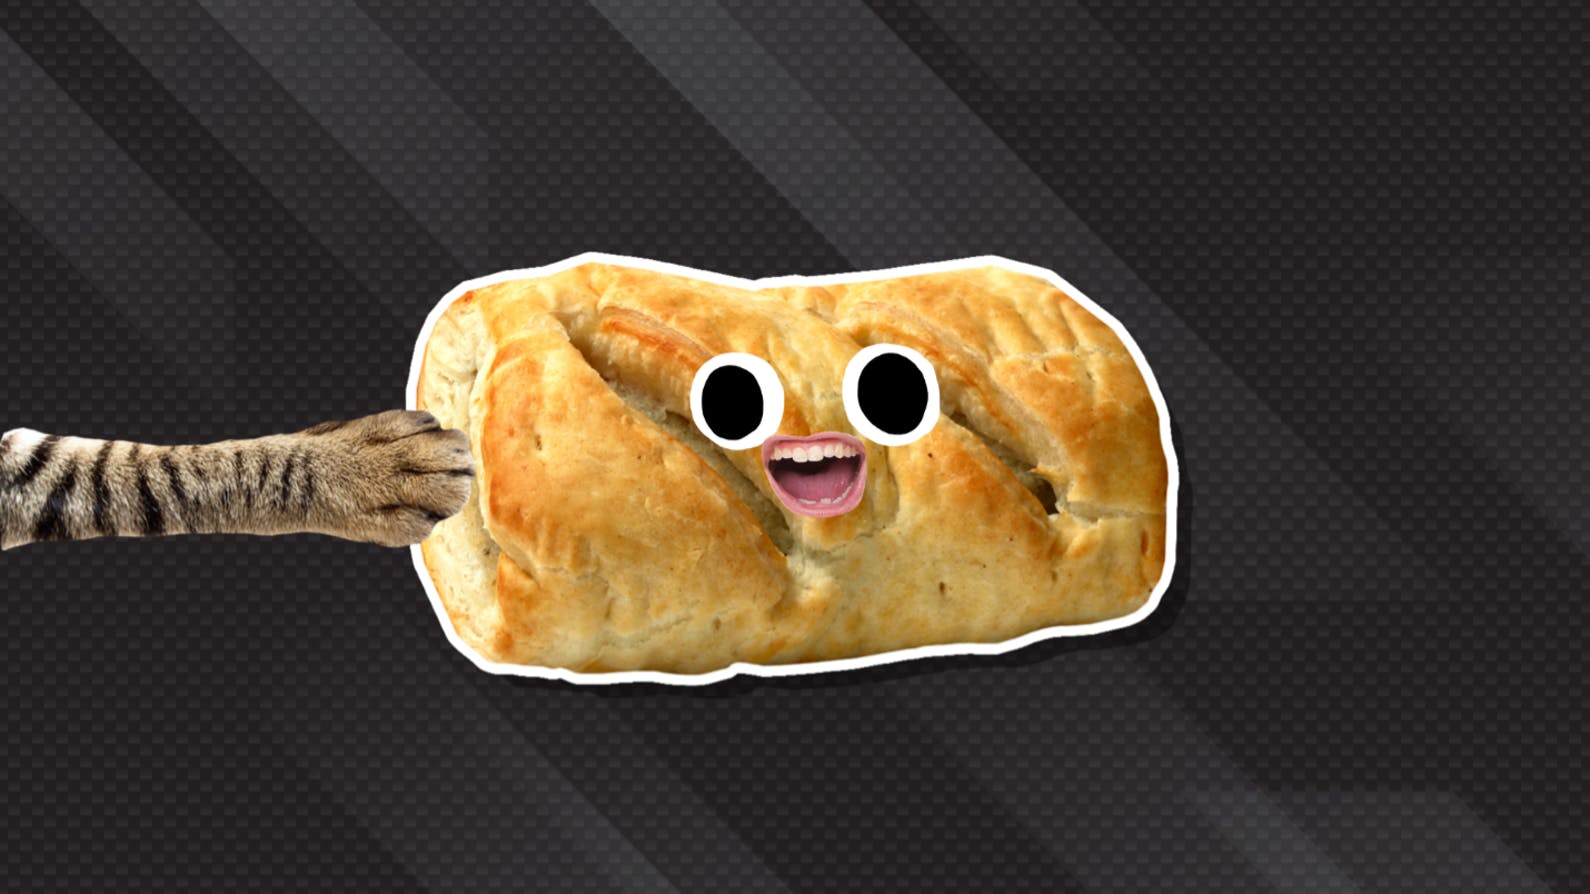 A cat's paw touching a sausage roll